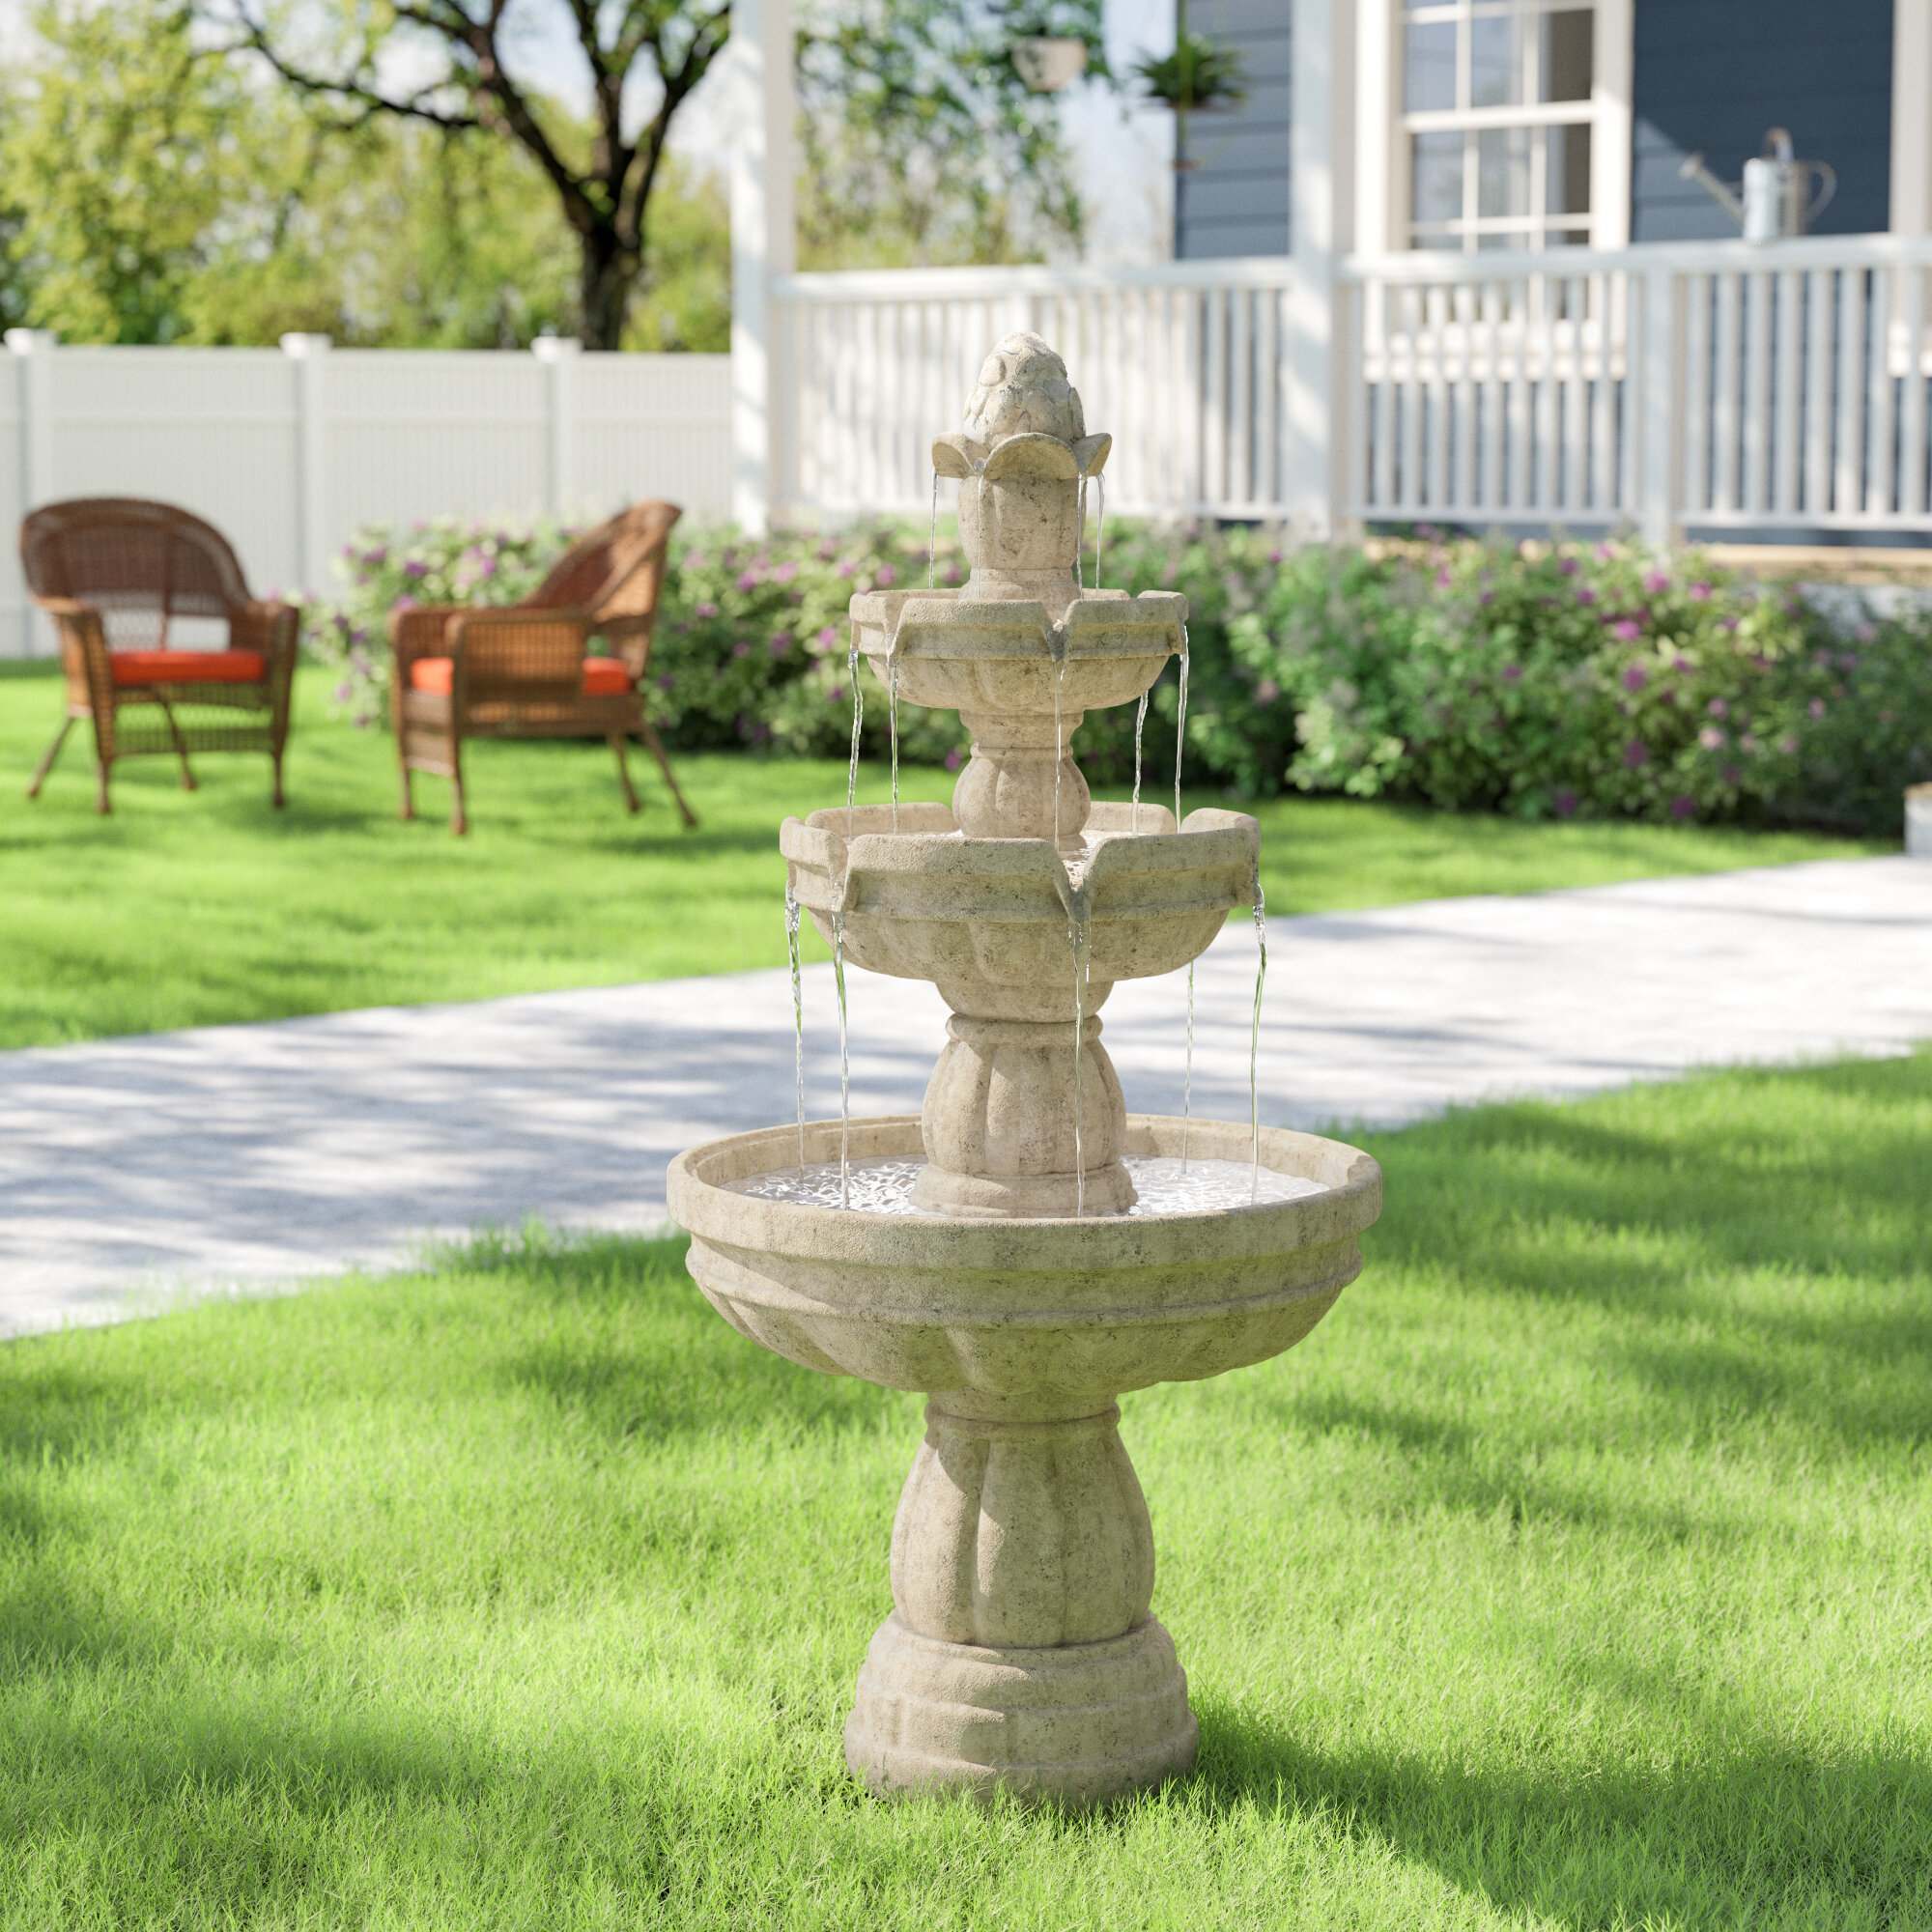 Outdoor Water Fountains For Sale